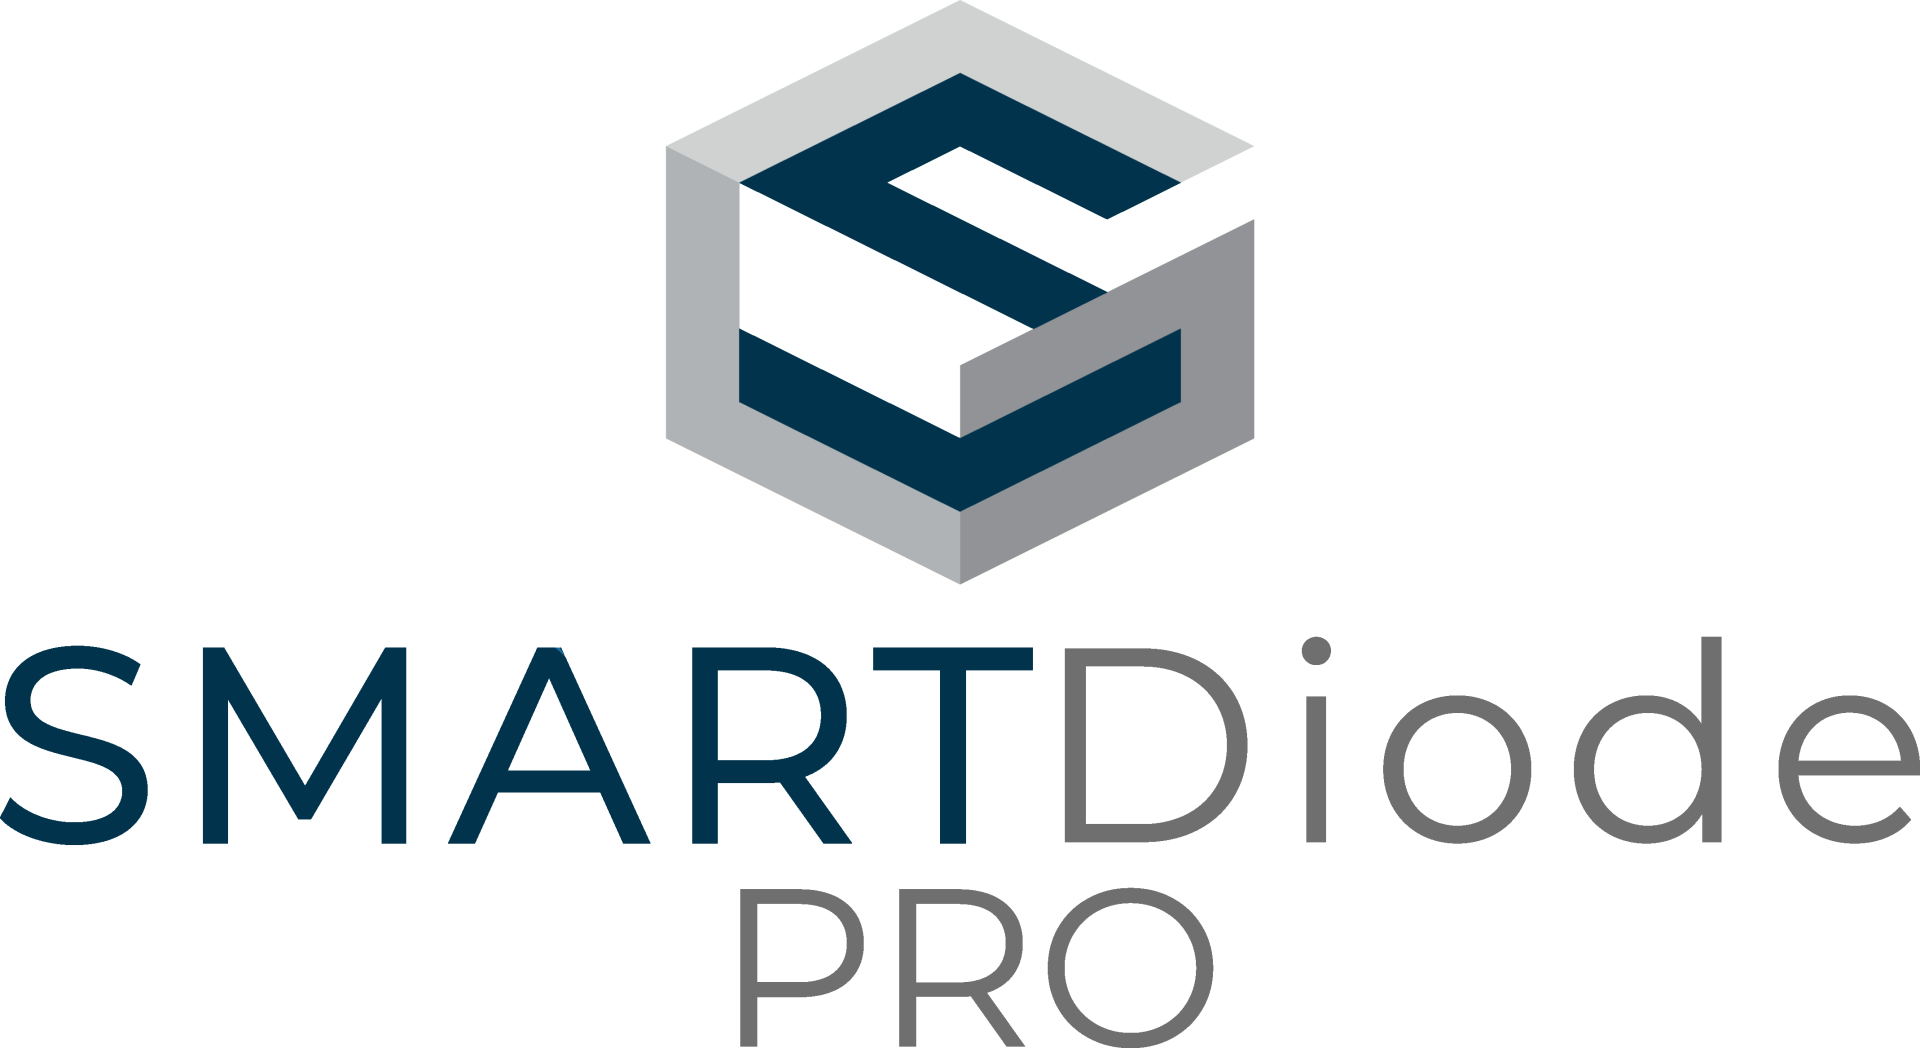 The logo for smartdiode pro is a cube with a letter s on it.